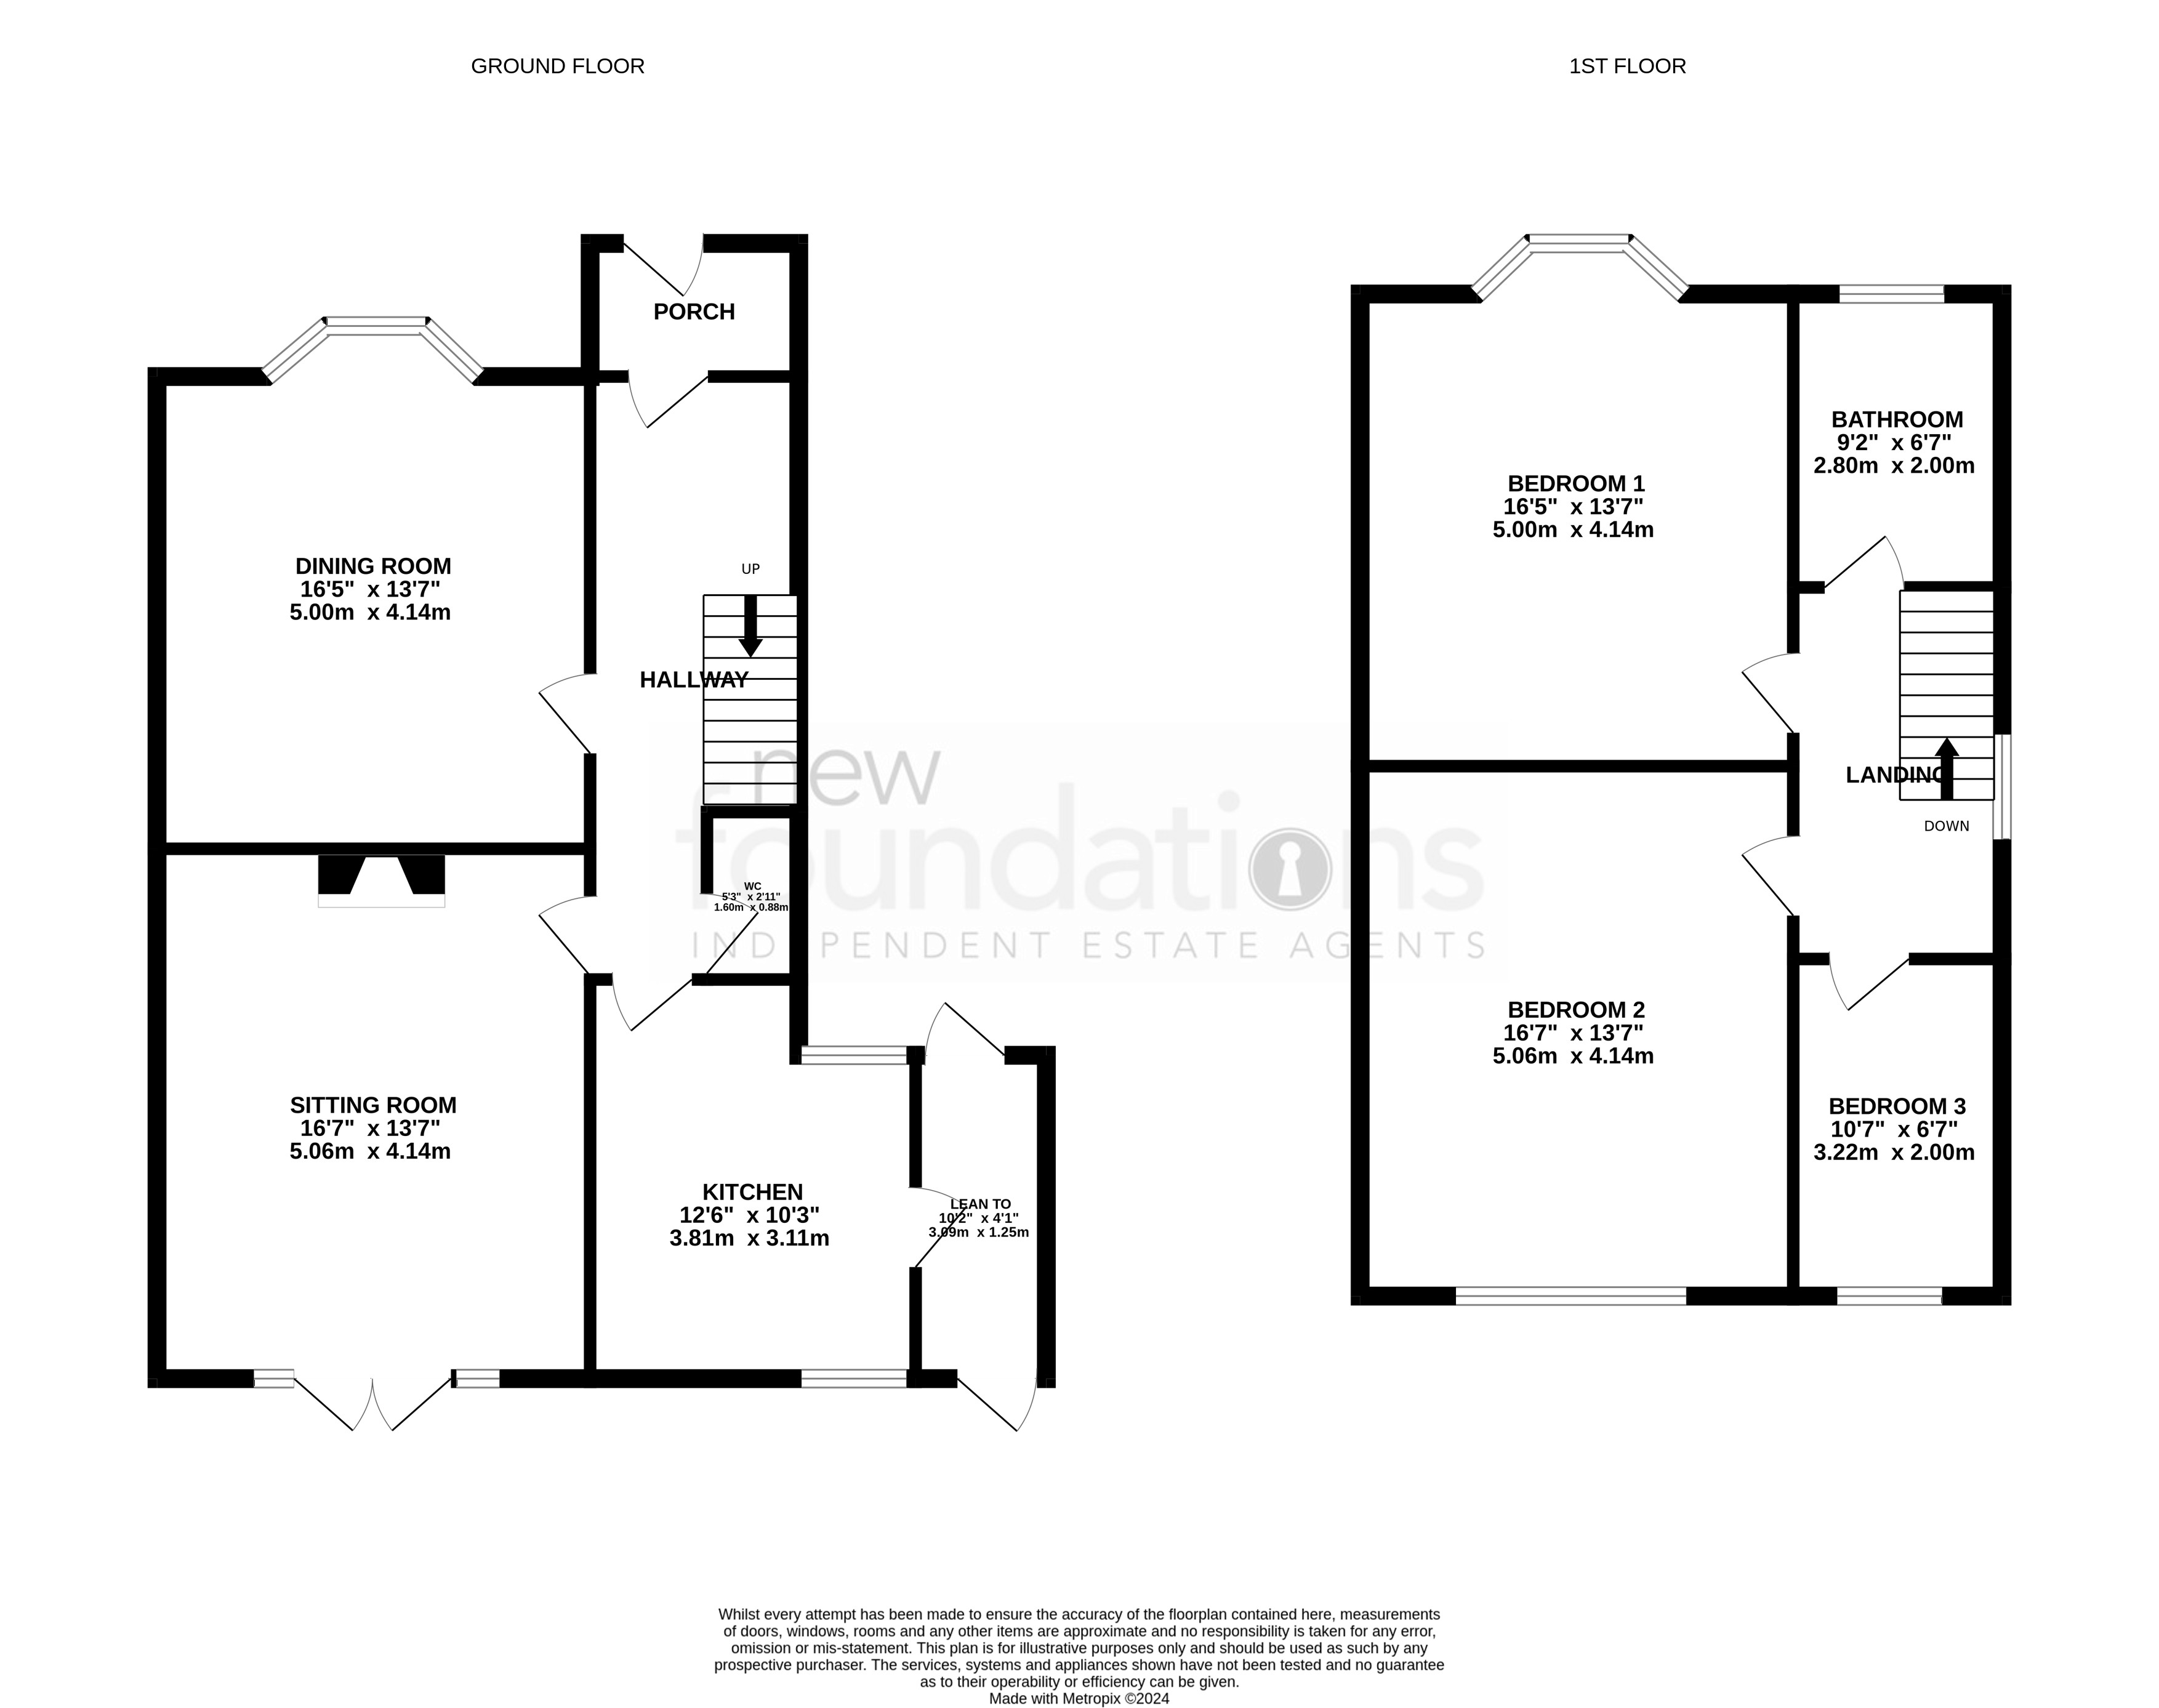 Floorplans For Little Common Road, Bexhill-on-Sea, East Sussex